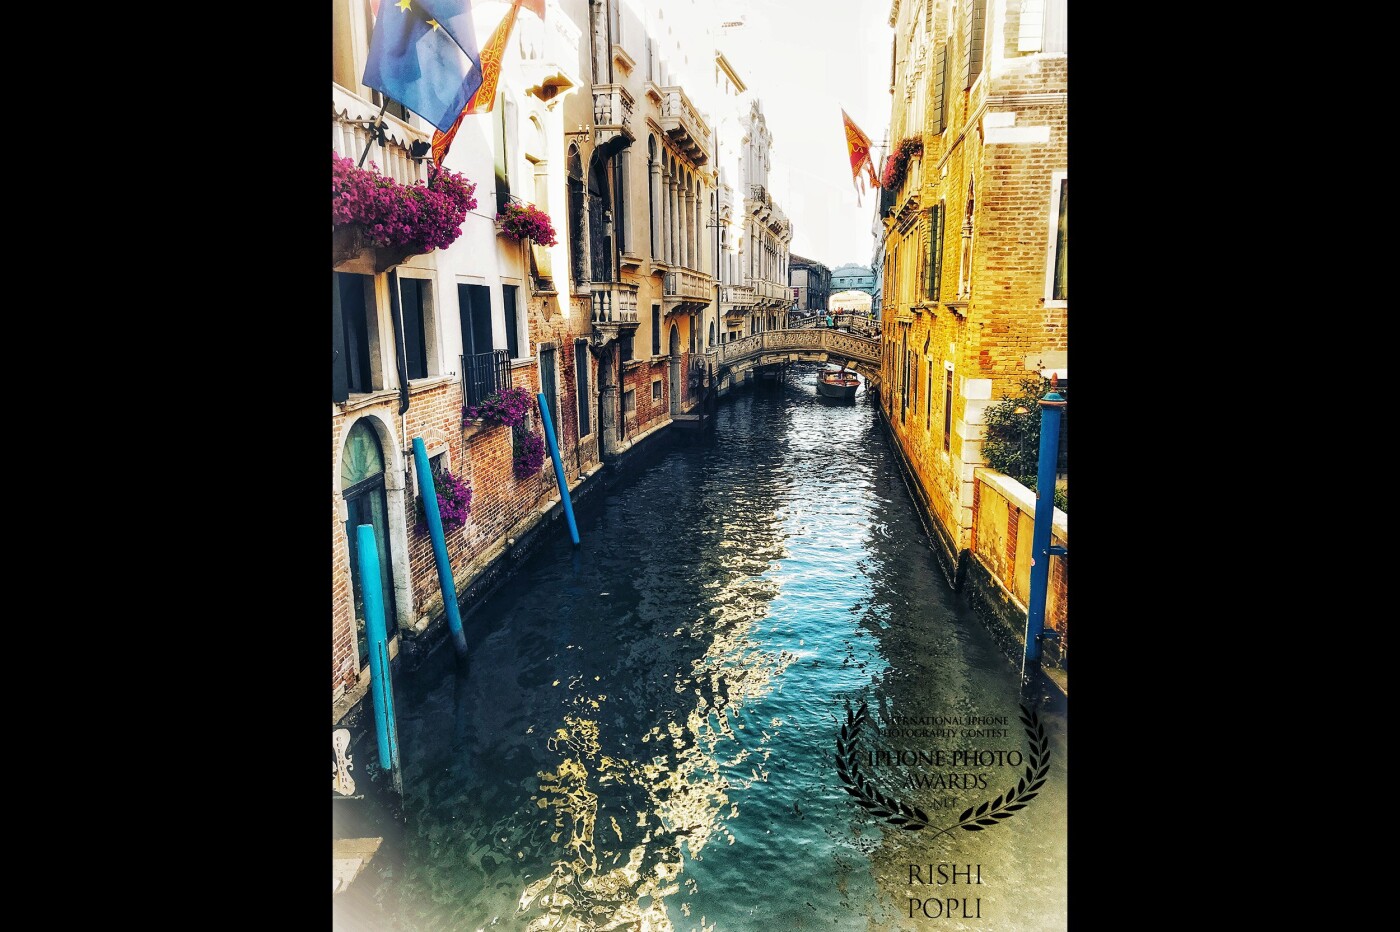 The living experience of being able to enjoy a gondolier sing while navigating through the historic Venetian canals feels like a chapter from a romantic novel. I was blessed to be able to share this experience with the wife and 2 daughters.  